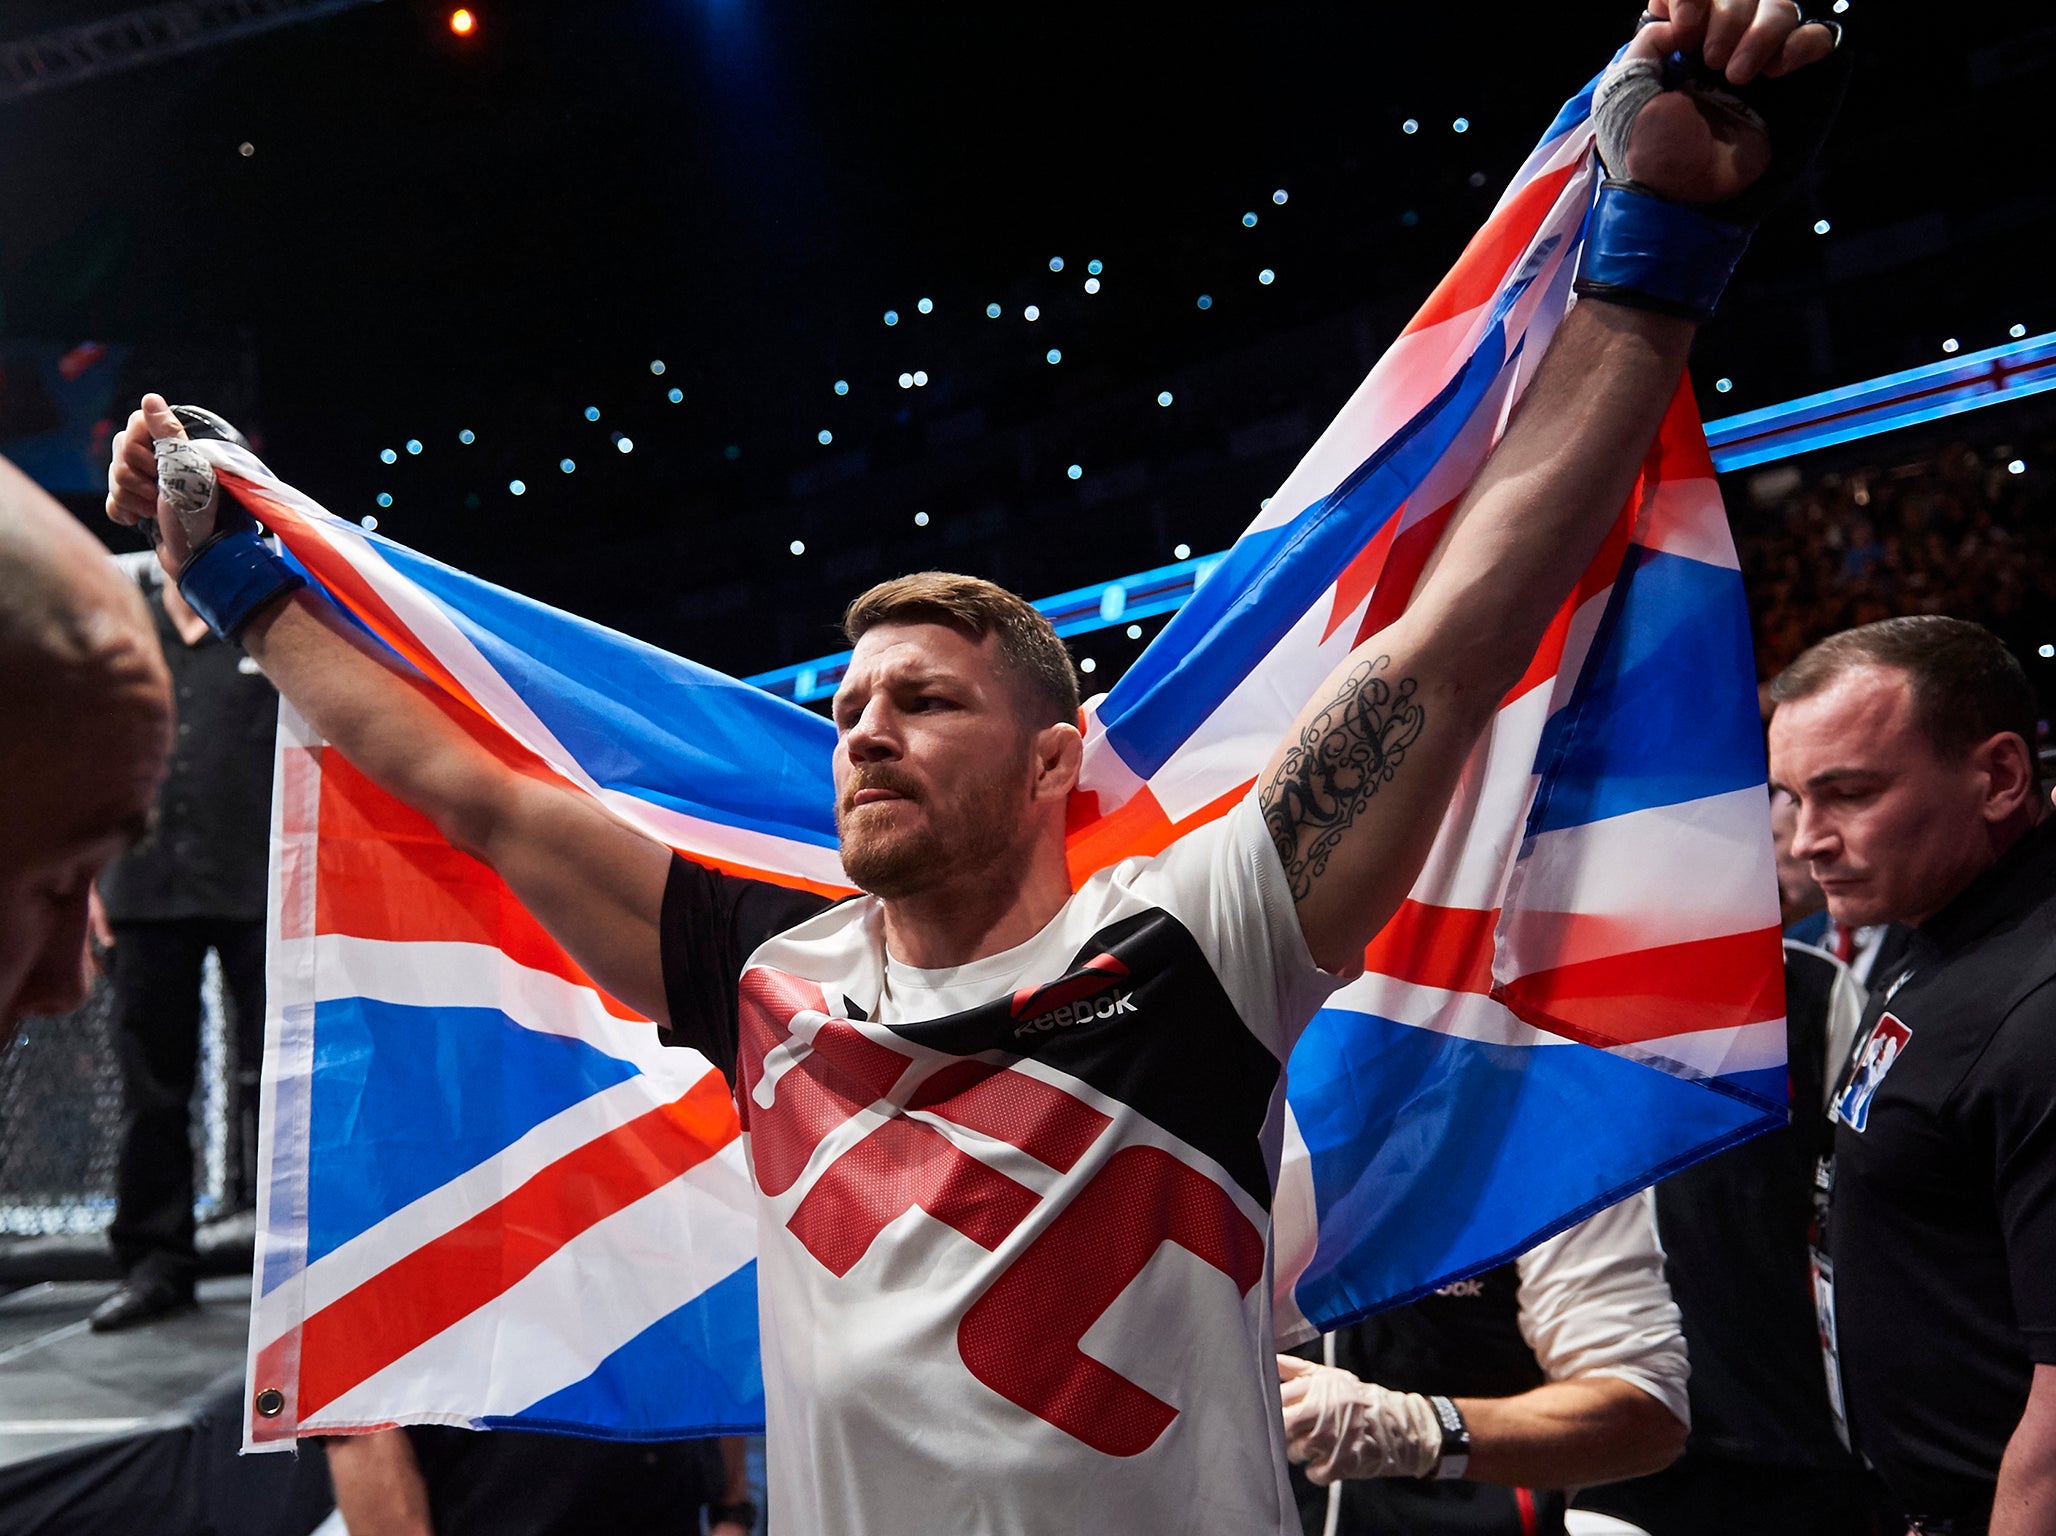 Michael Bisping wants to bow out with one more fight